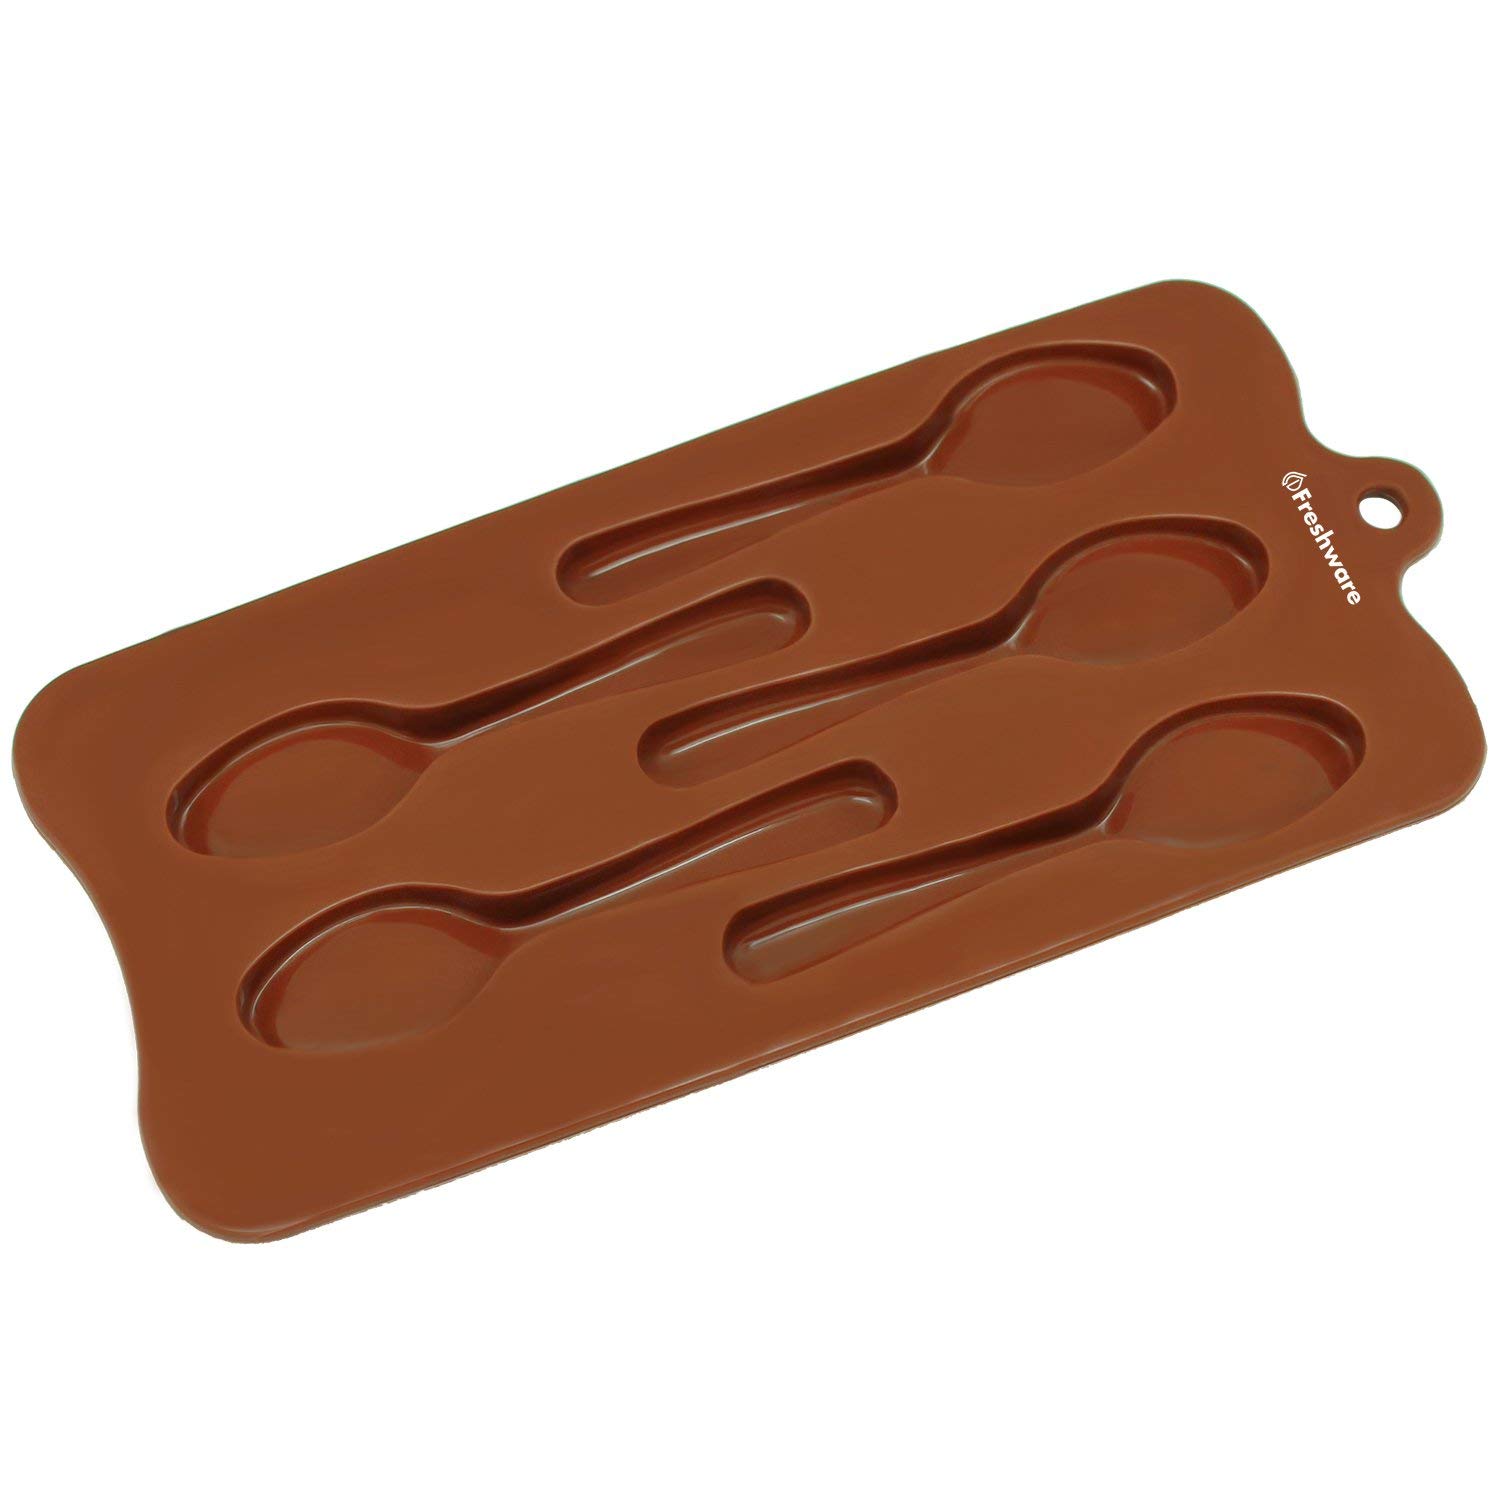 Silicone Chocolate Candy Molds [Spoon, 5 Cup] - Non Stick, BPA Free, Reusable 100% Silicon & Dishwasher Safe Silicon - Kitchen Rubber Tray For Ice, Crayons, Fat Bombs and Soap Molds